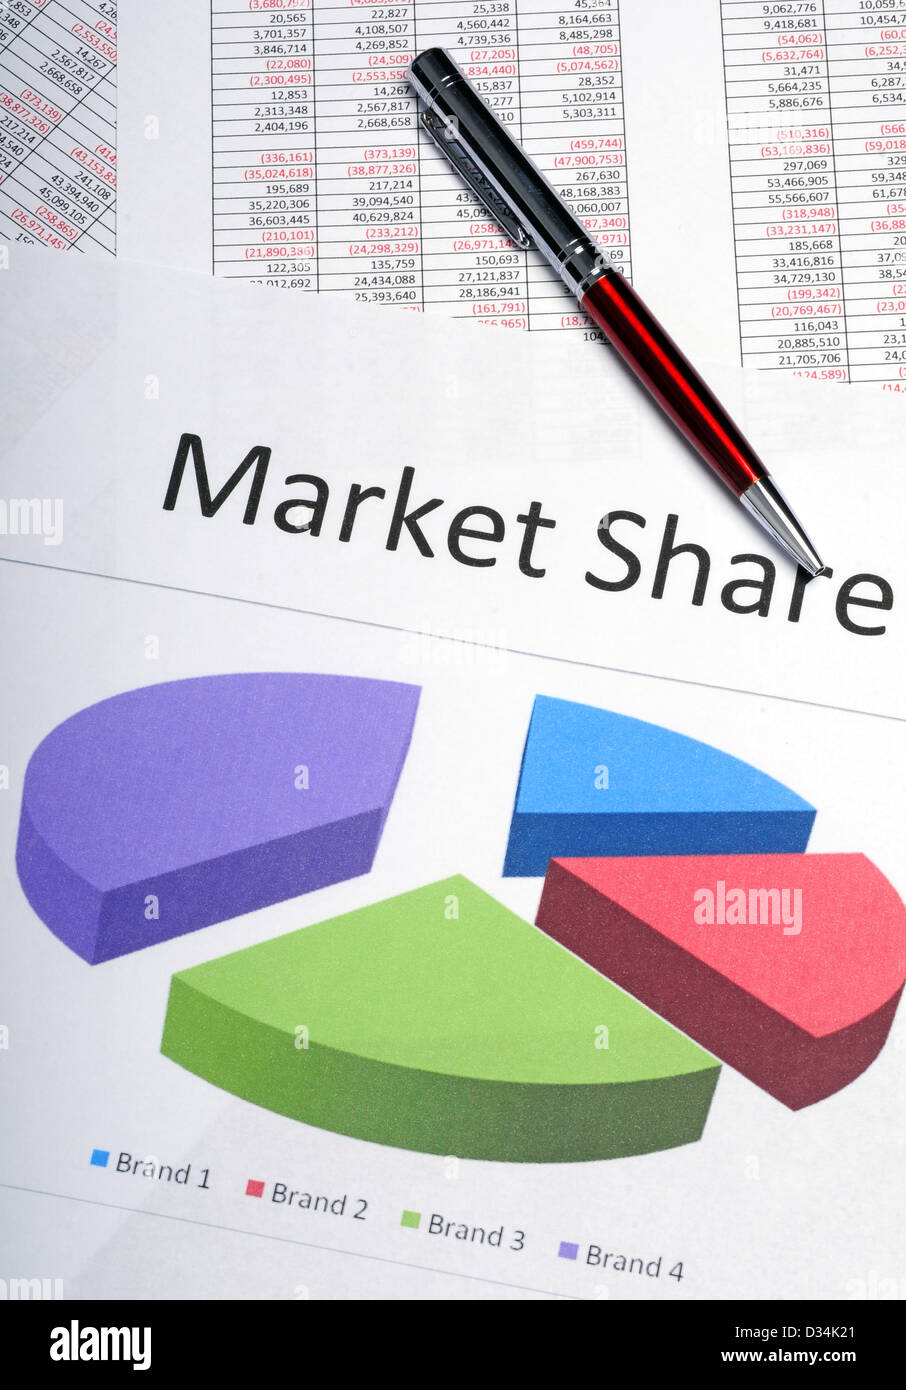 A sales chart showing the market share comparison between brands for marketing analysis Stock Photo